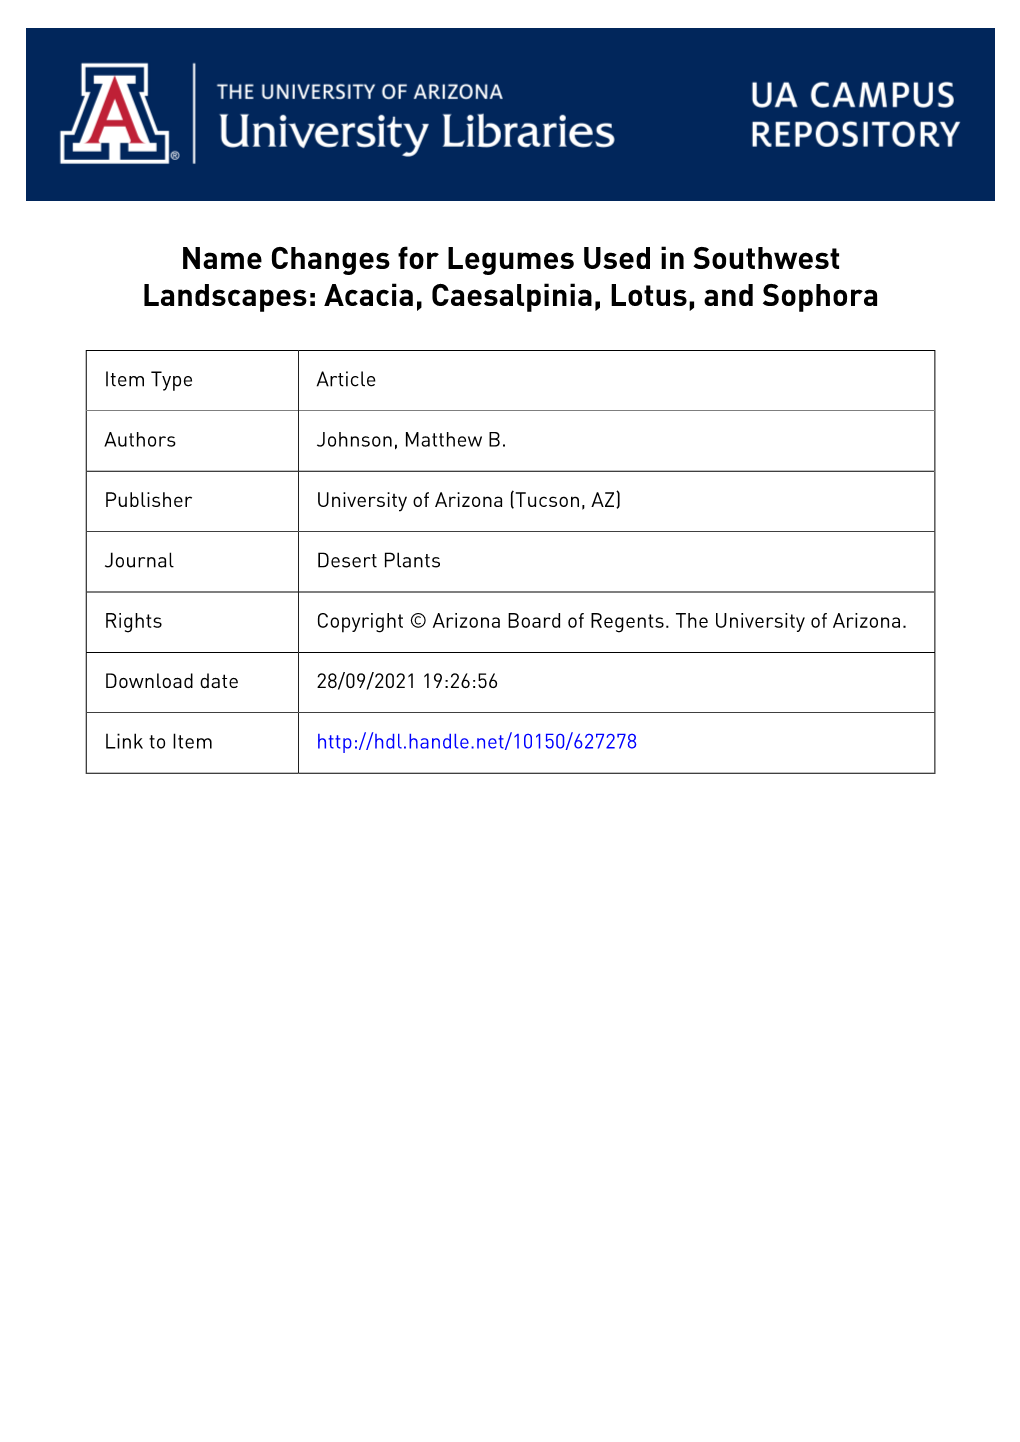 Name Changes for Legumes Used in Southwest Landscapes: Acacia, Caesalpinia, Lotus, and Sophora